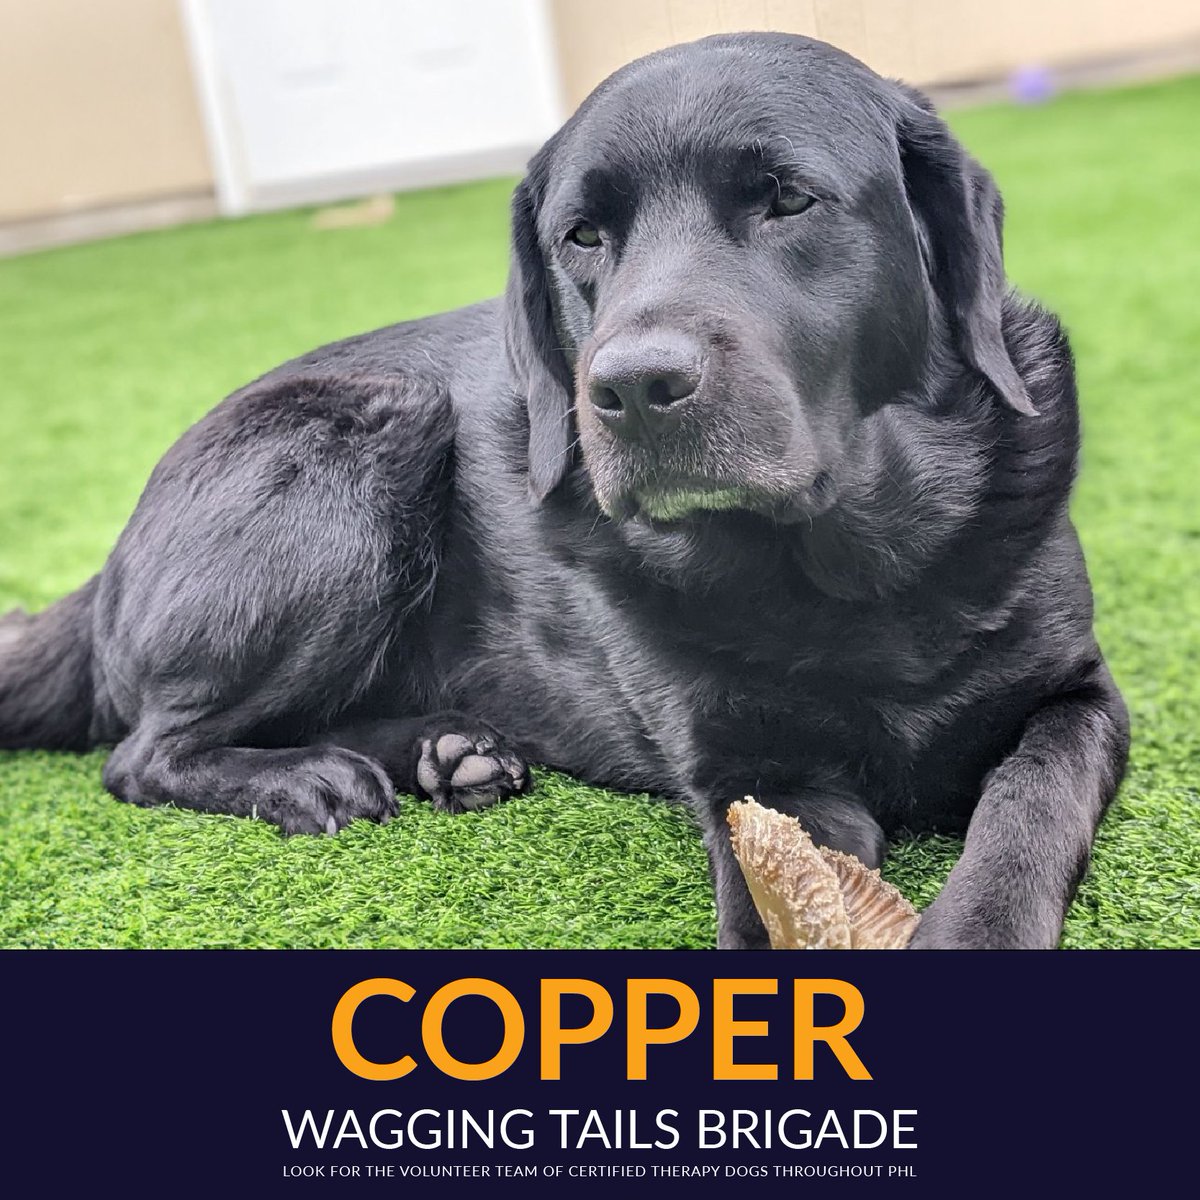 Happy Monday! Copper is at #PHLAirport today to make sure it's a good one. Look for the Wagging Tails Brigade member from 10 am-noon. #airporttherapydogs